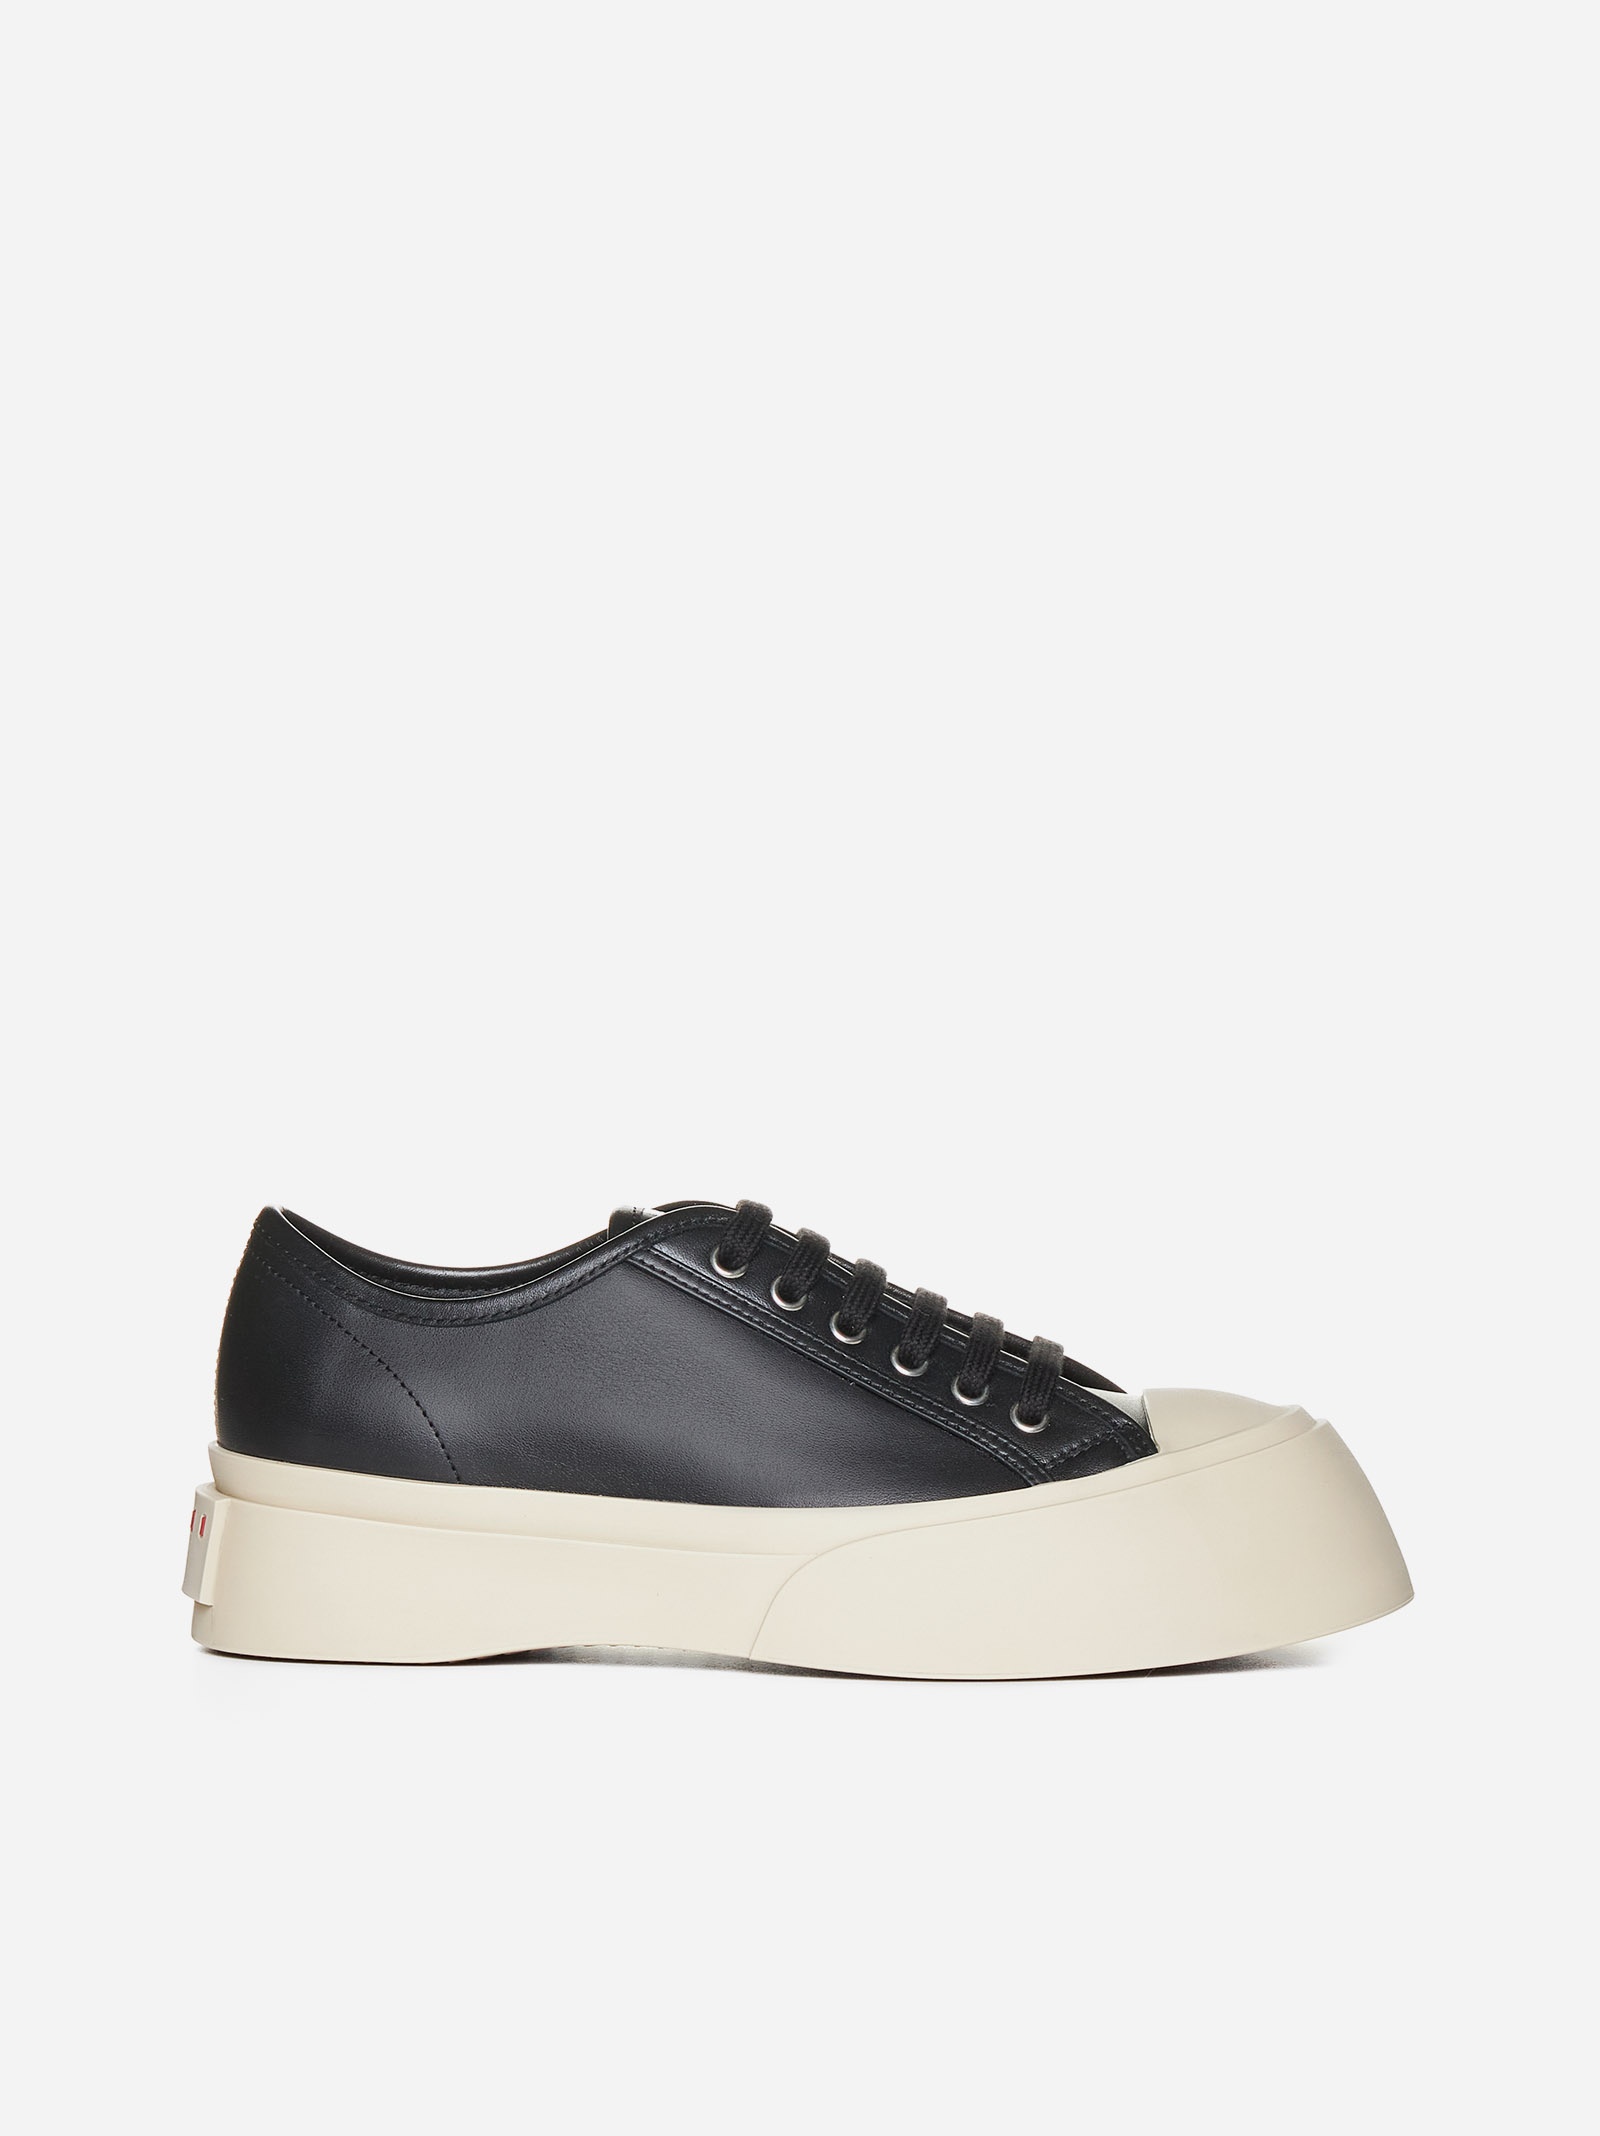 Pablo leather sneakers - 1